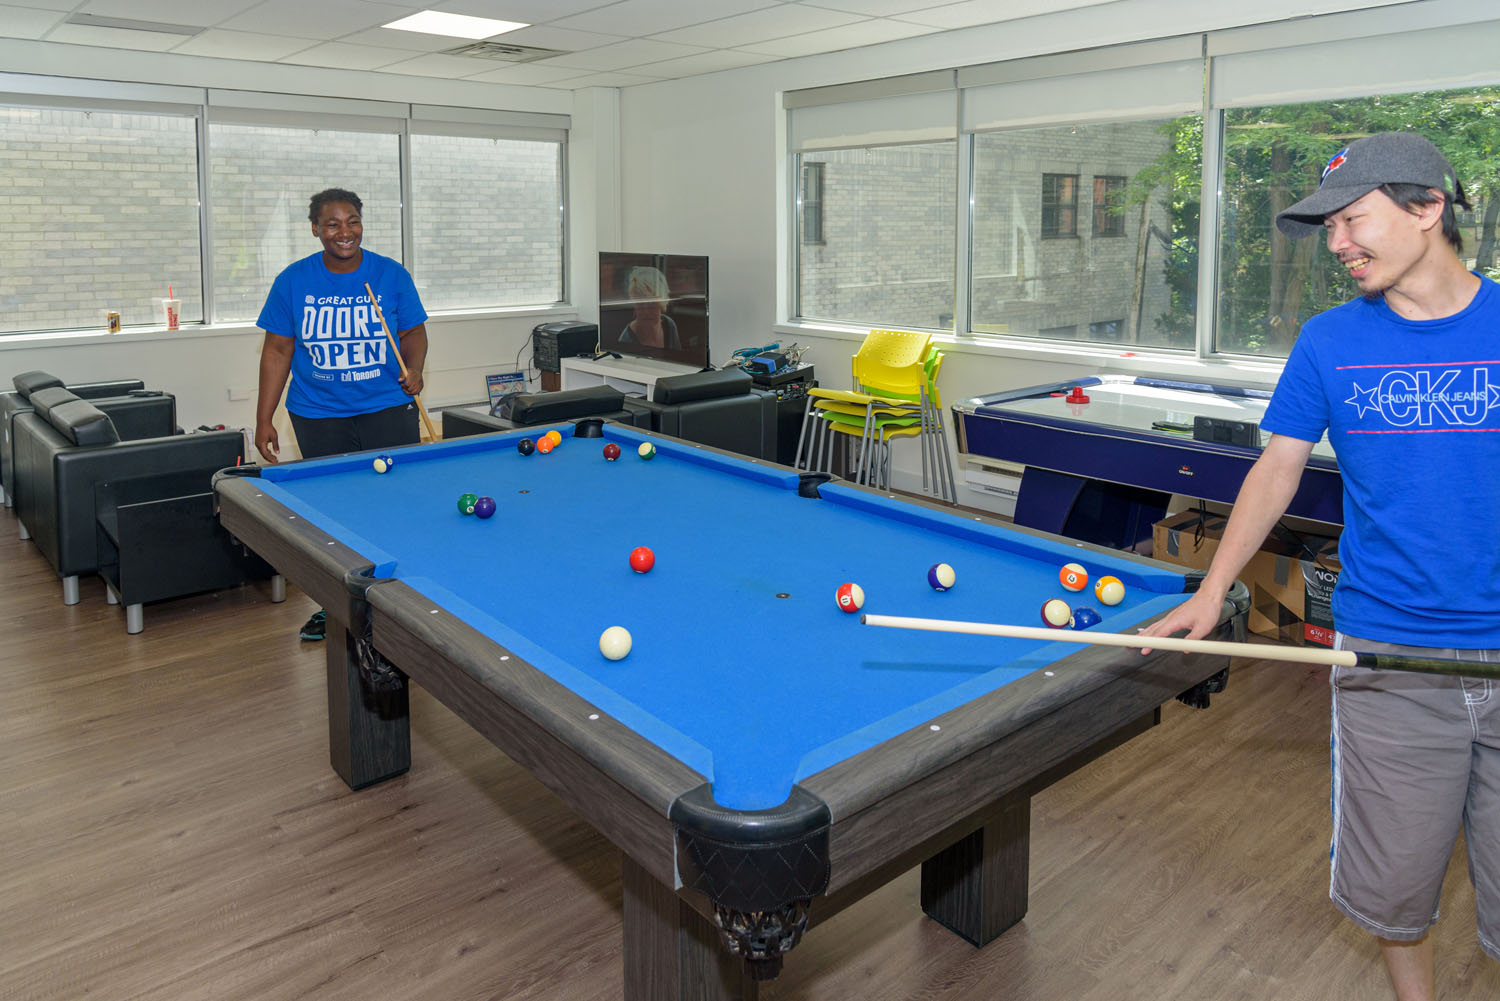 2 people wearing 2 different blue T-shirts playing pool. The pool table is also a similar blue as the T-shirts